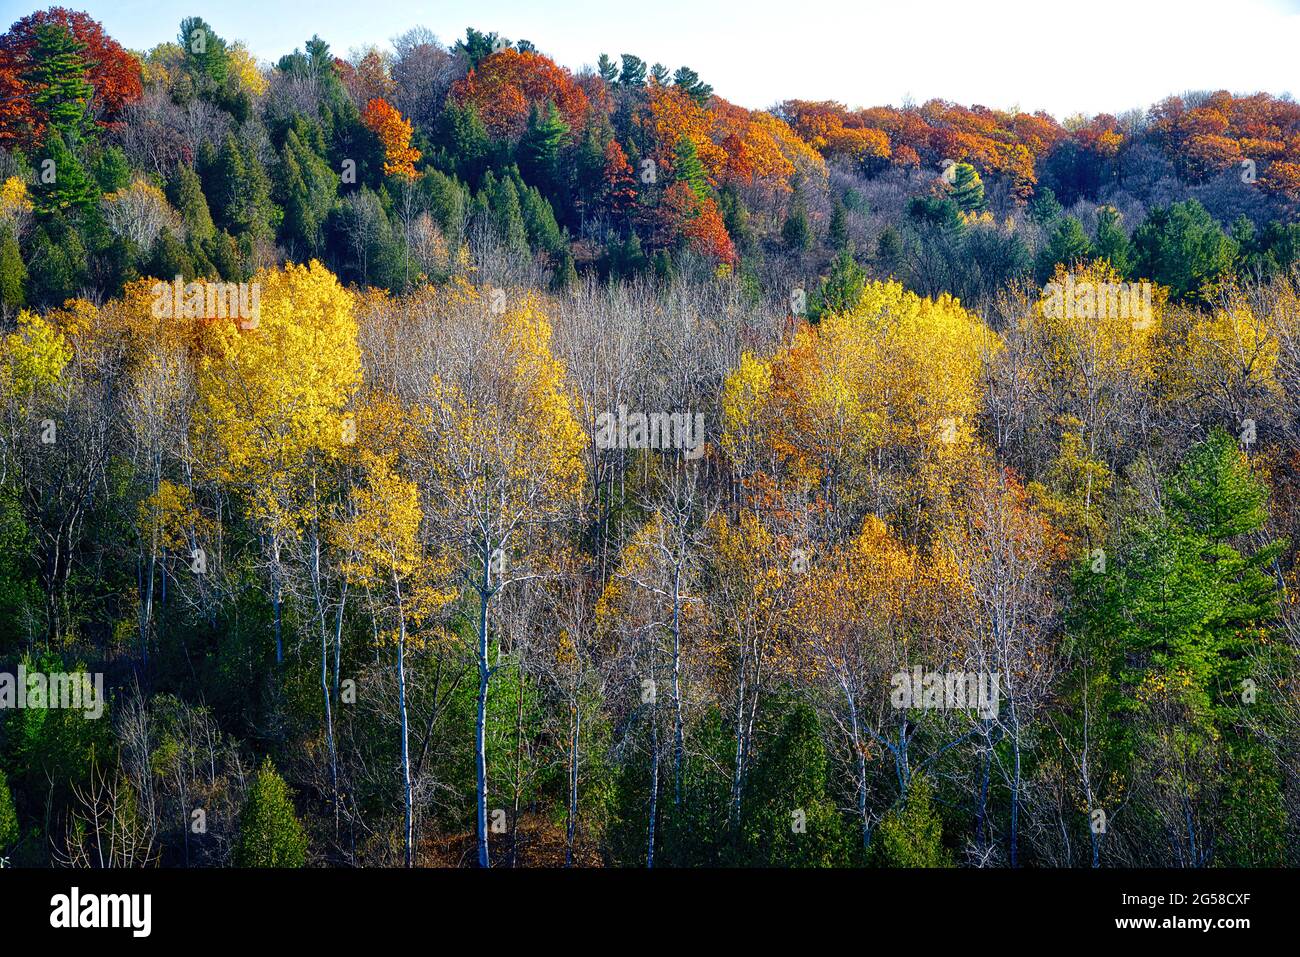 High angle view of the forest with colourful yellow, red and orange colour leaves. Stock Photo